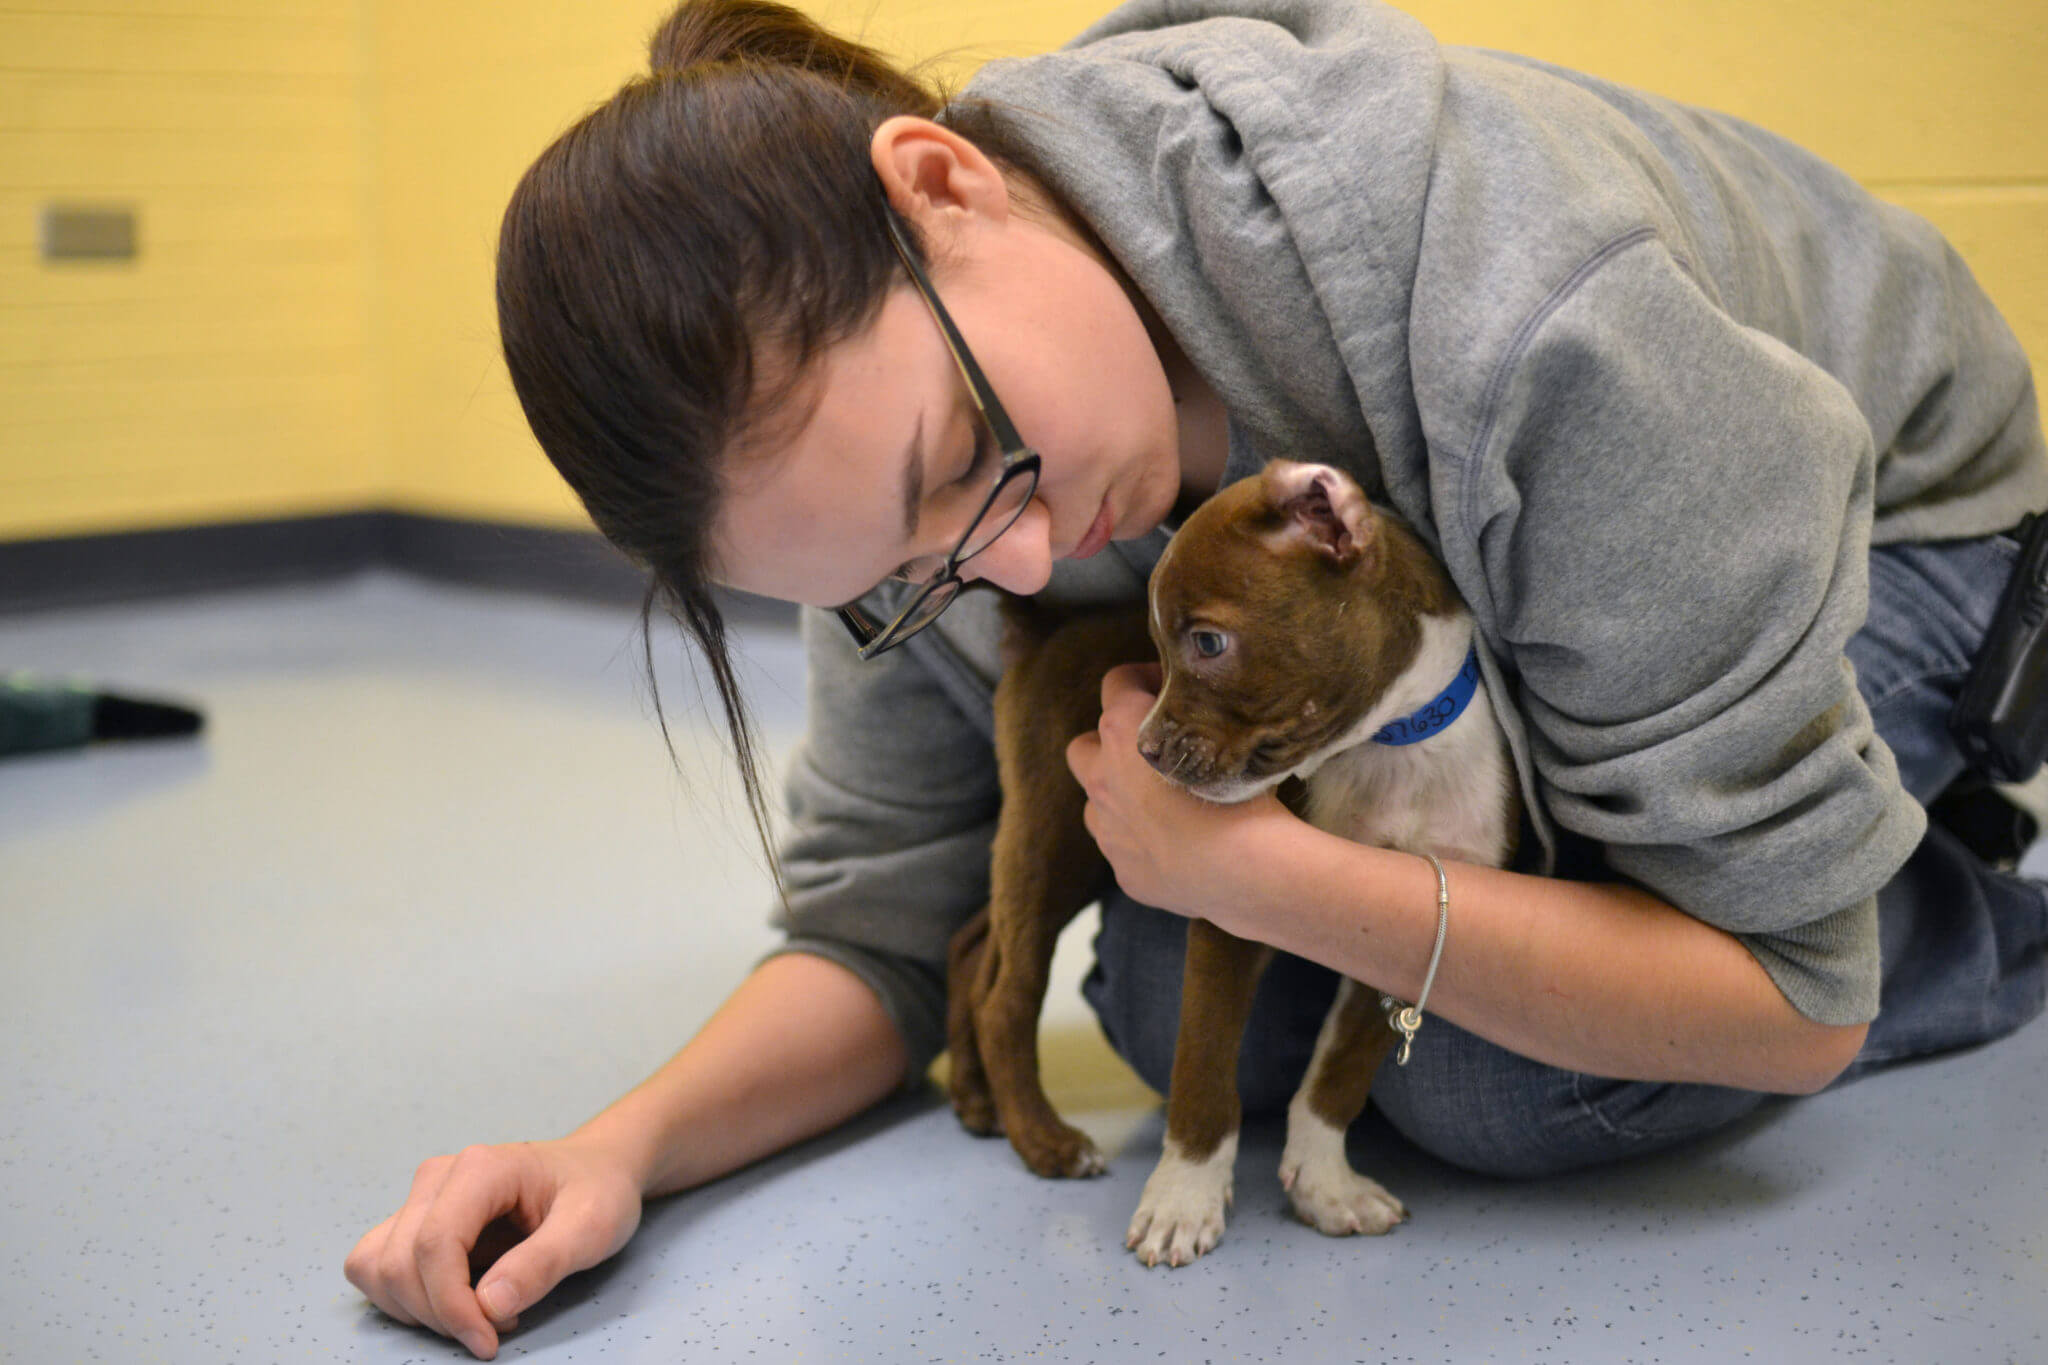 Our hard working staff cares greatly for each animal that comes through our doors.